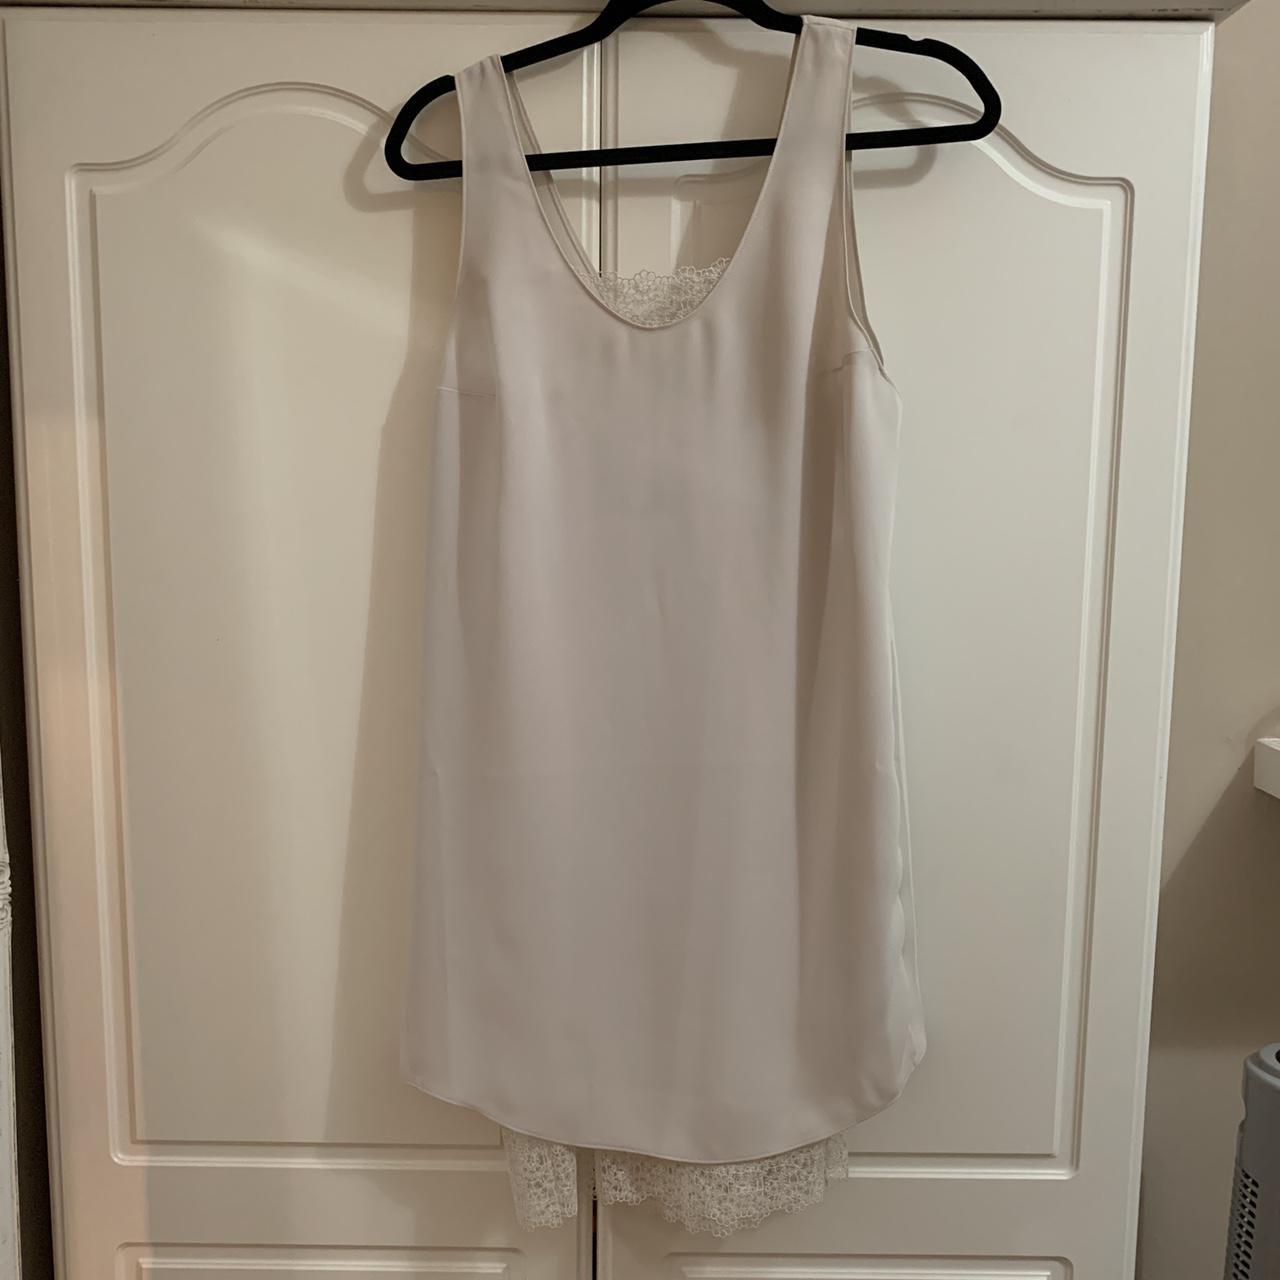 THE KOOPLES cream/pale grey dress with lace slip... - Depop